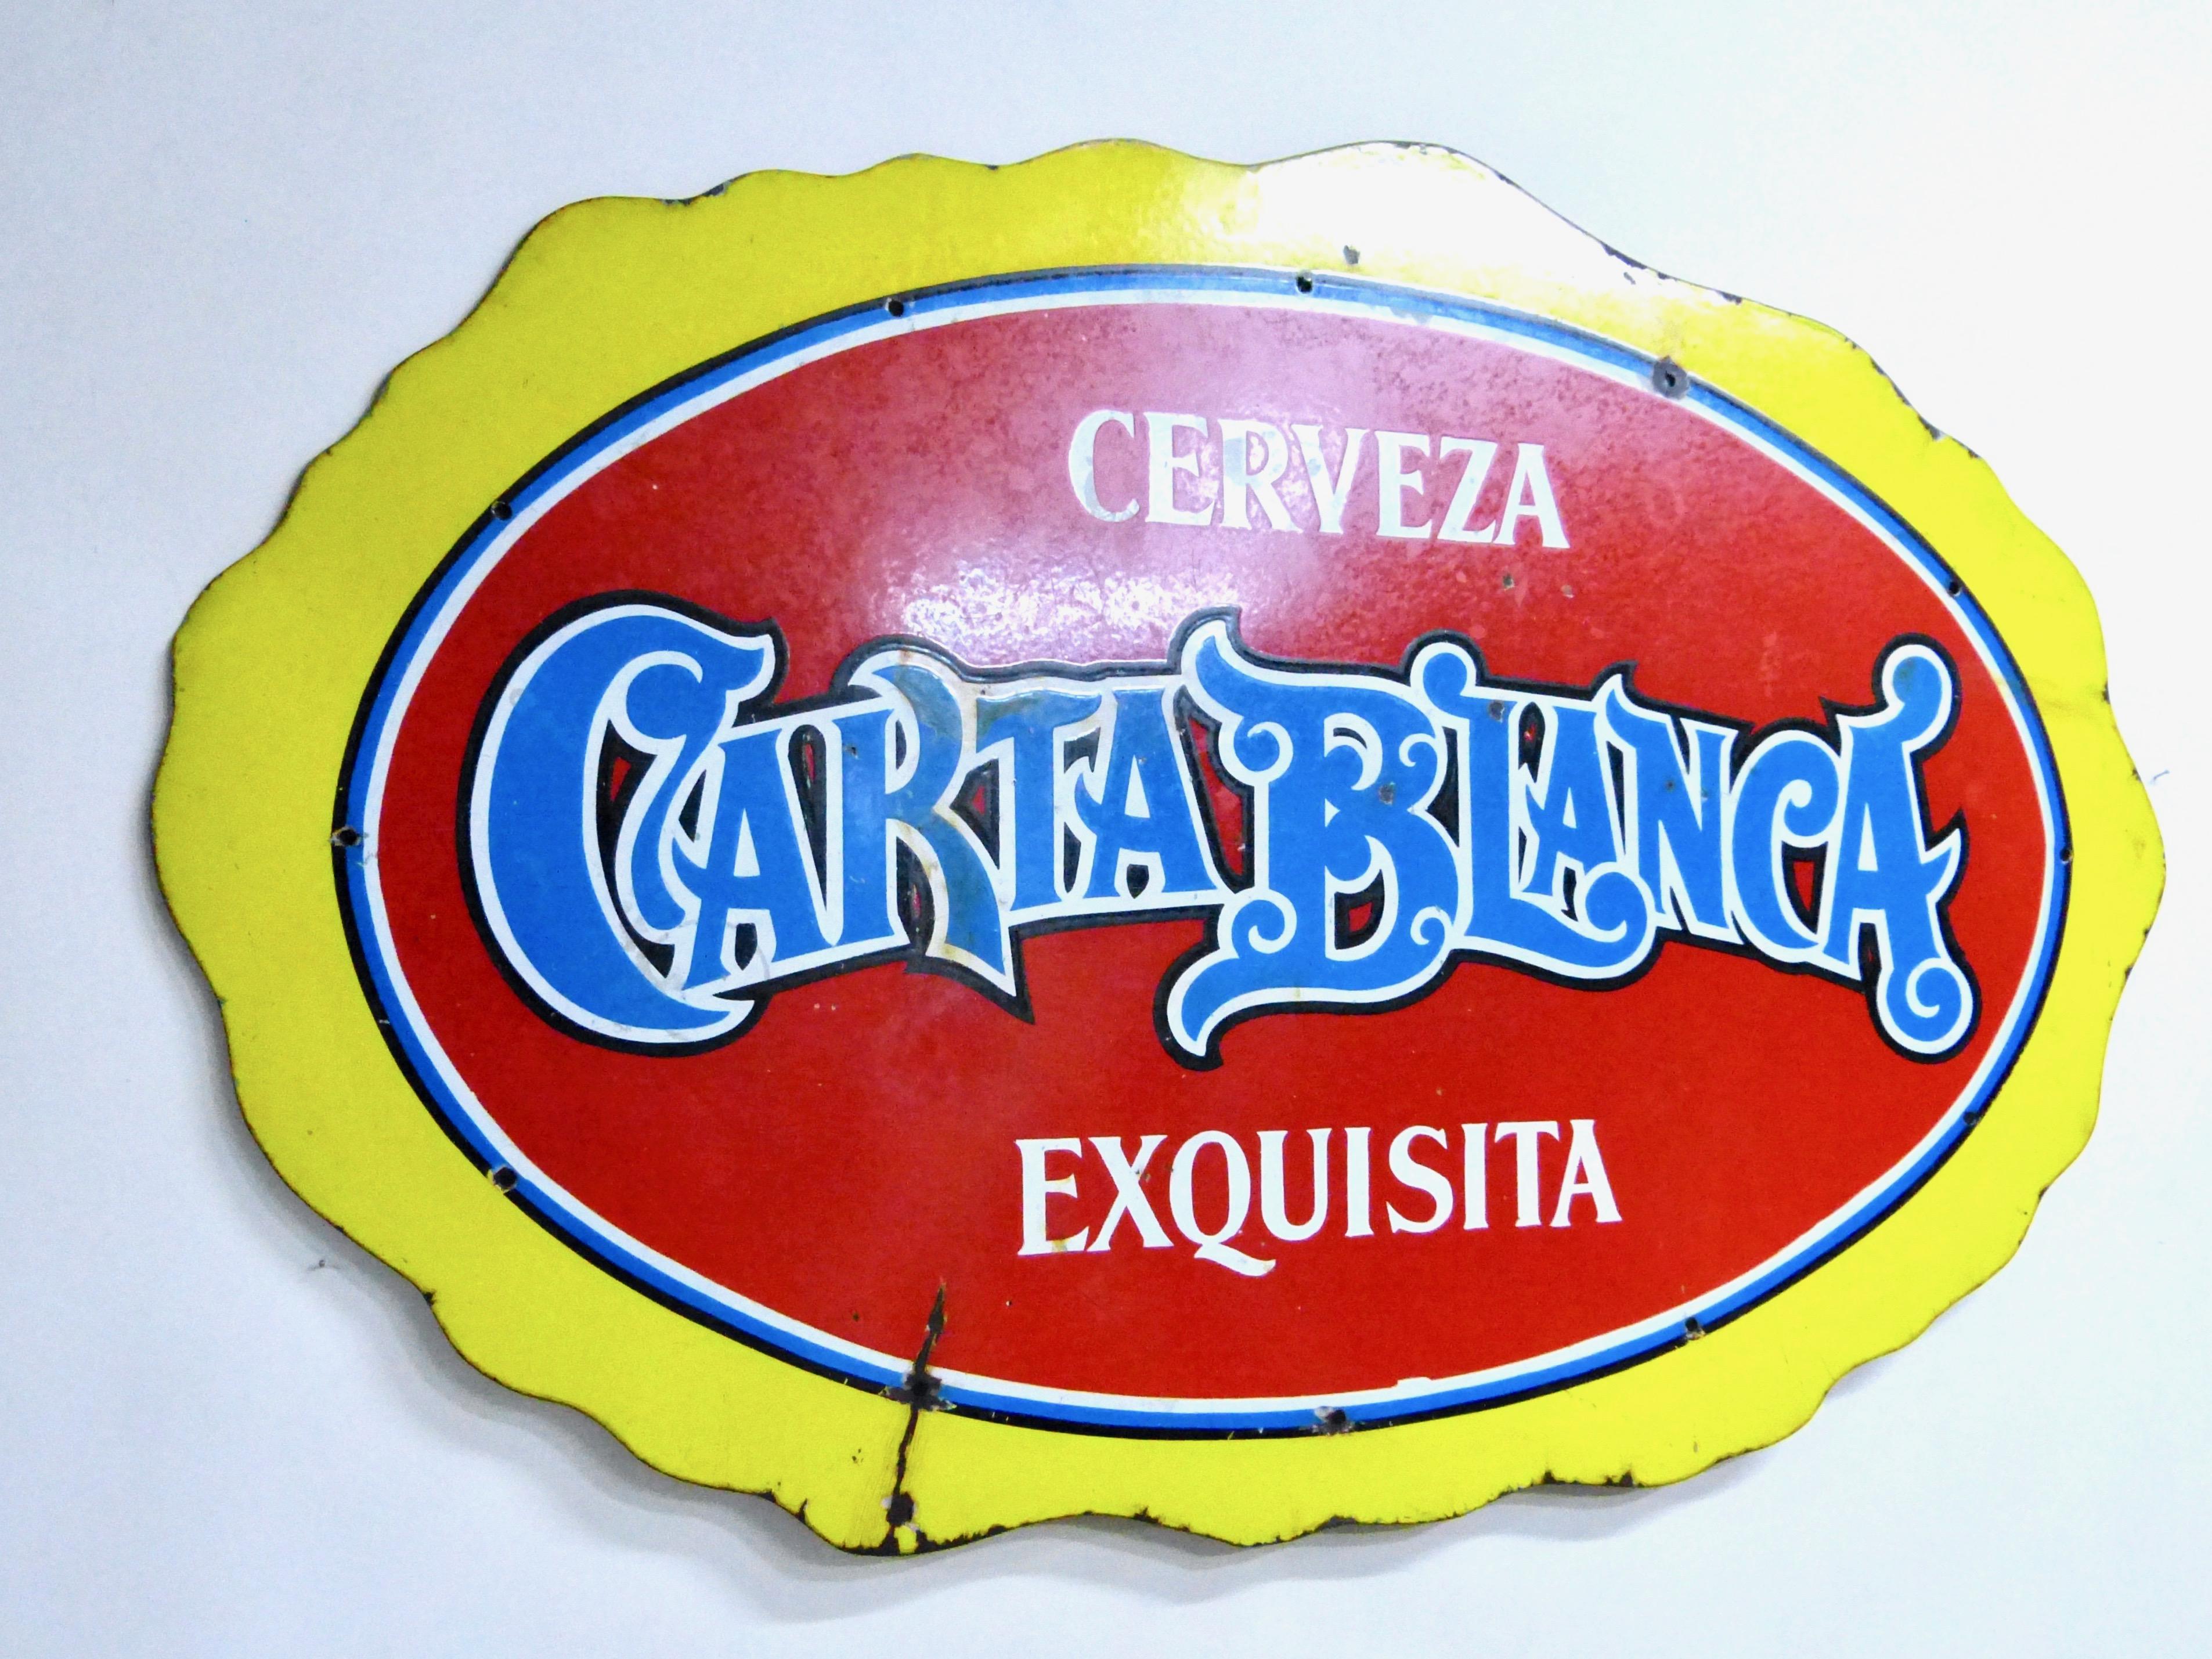 Antique Carta Blanca beer porcelain sign
Made in Mexico, circa 1950
Very good conditions, shows some dents
Measurements: 49